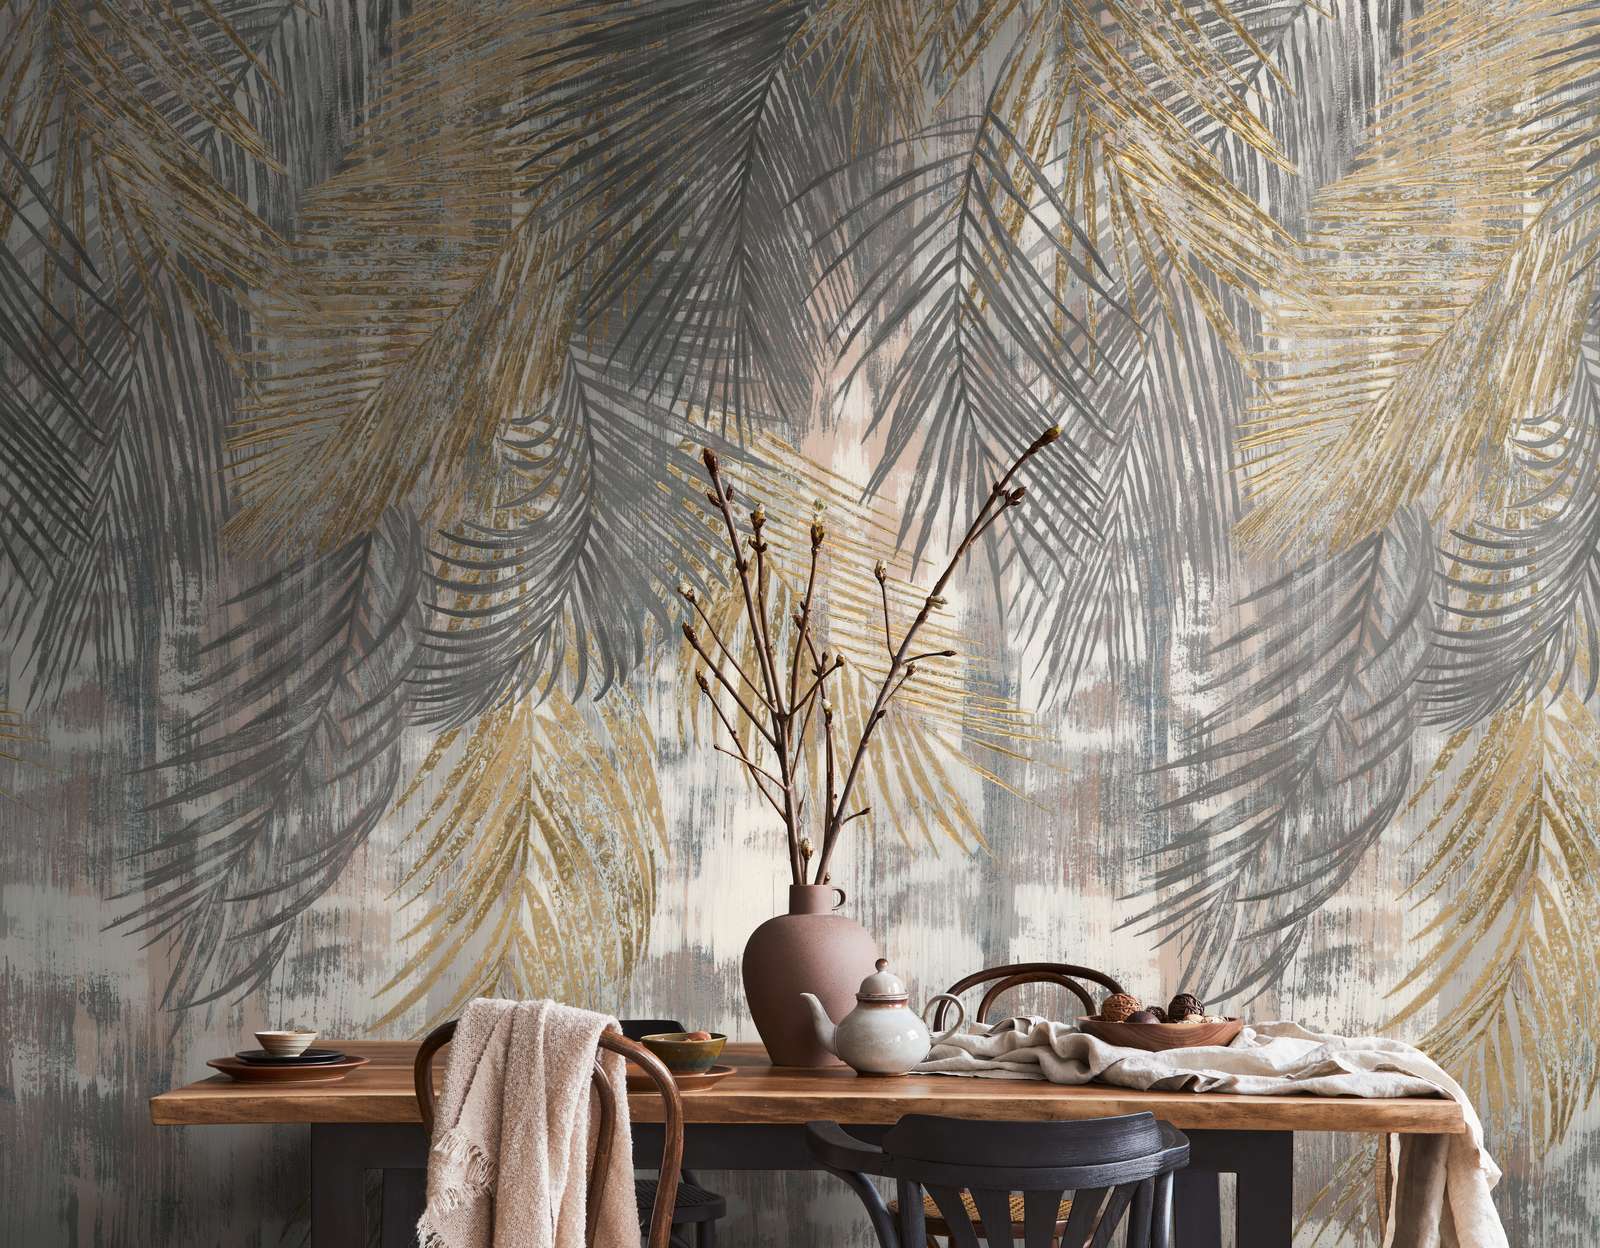             Non-woven wallpaper large palm leaves in used look - grey, yellow, beige
        